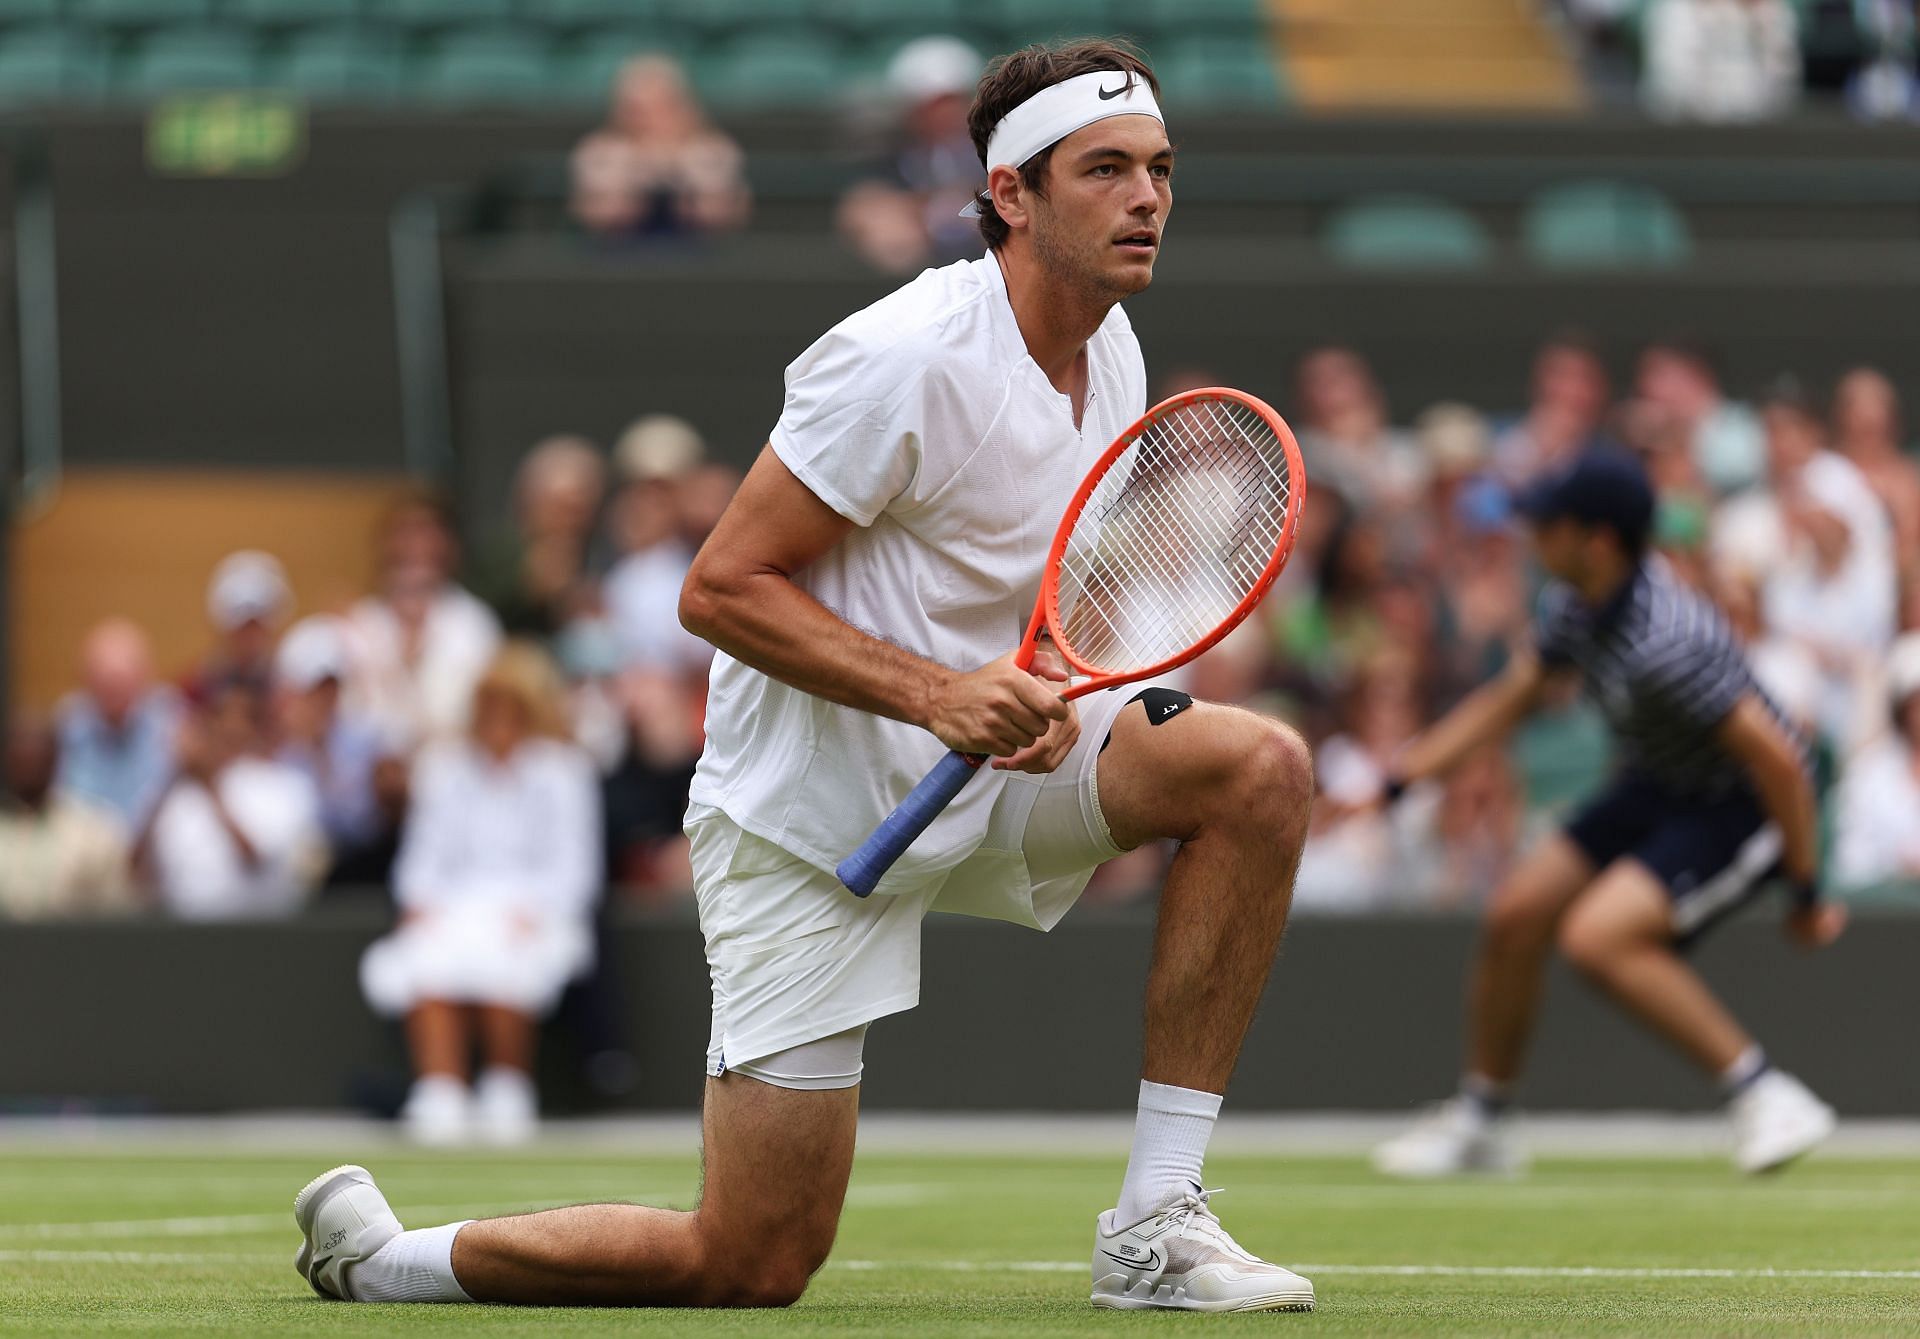 Taylor Fritz in action at the 2022 Wimbledon Championships.